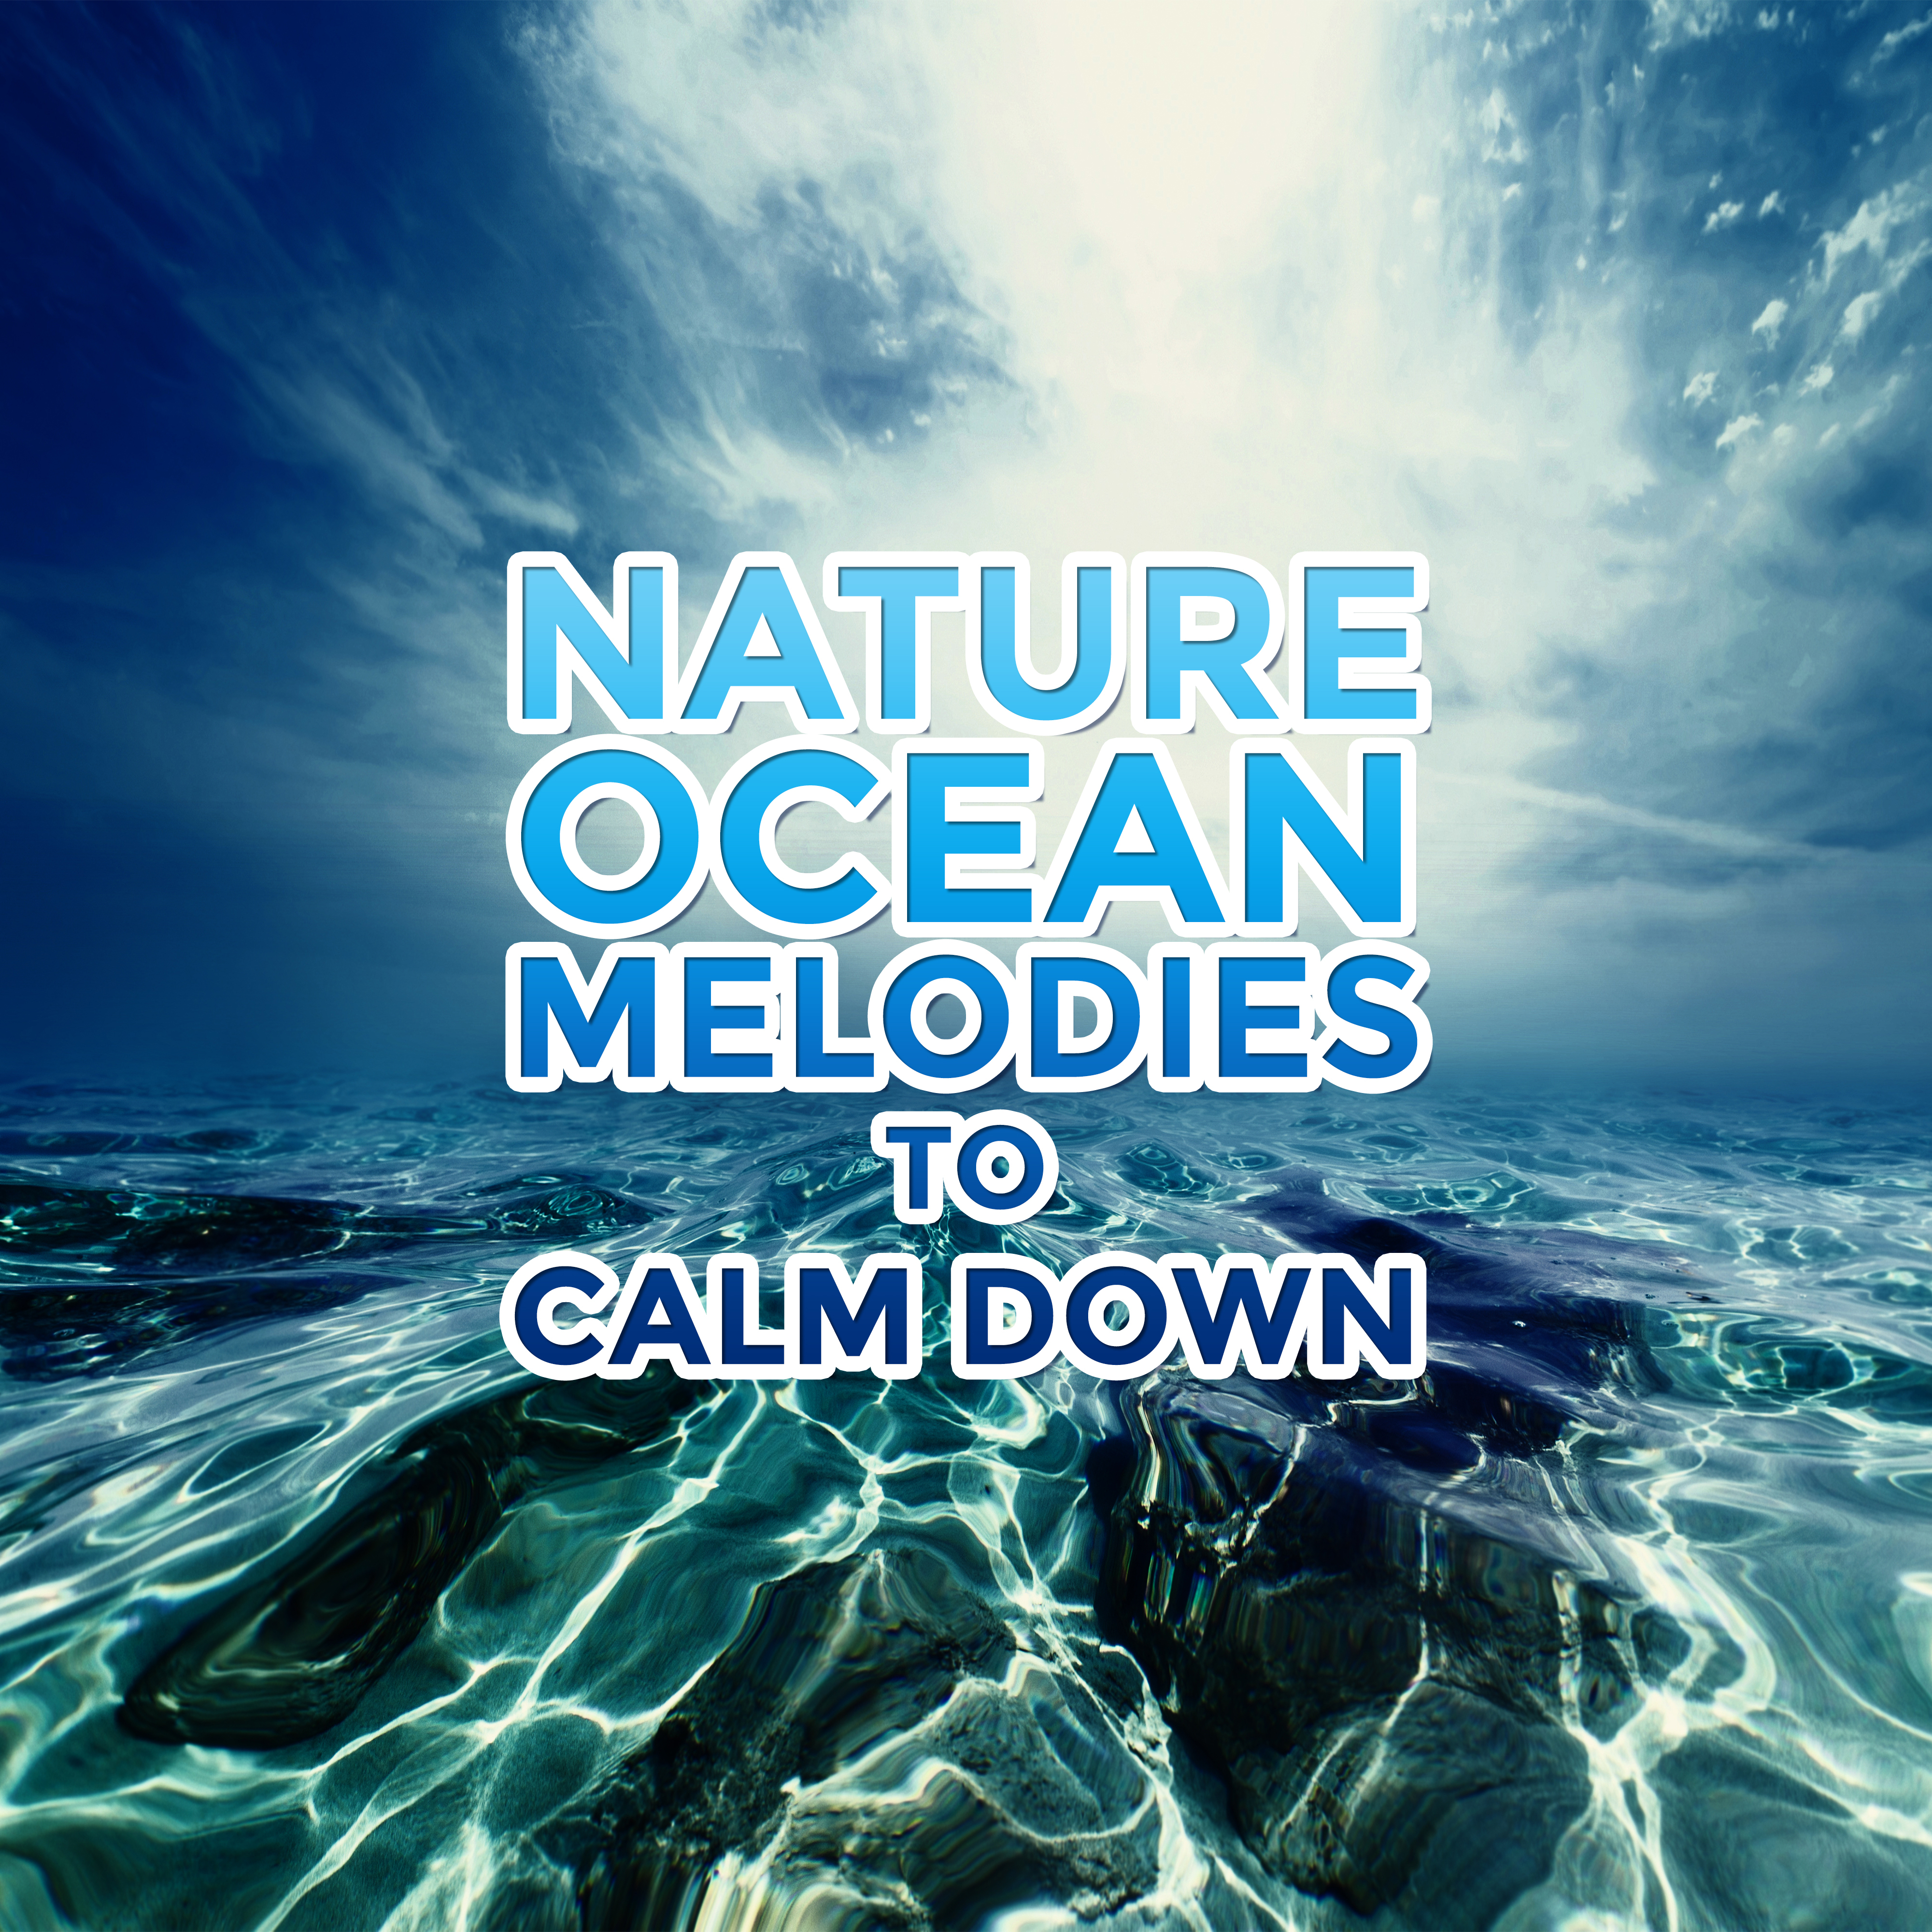 Nature Ocean Melodies to Calm Down